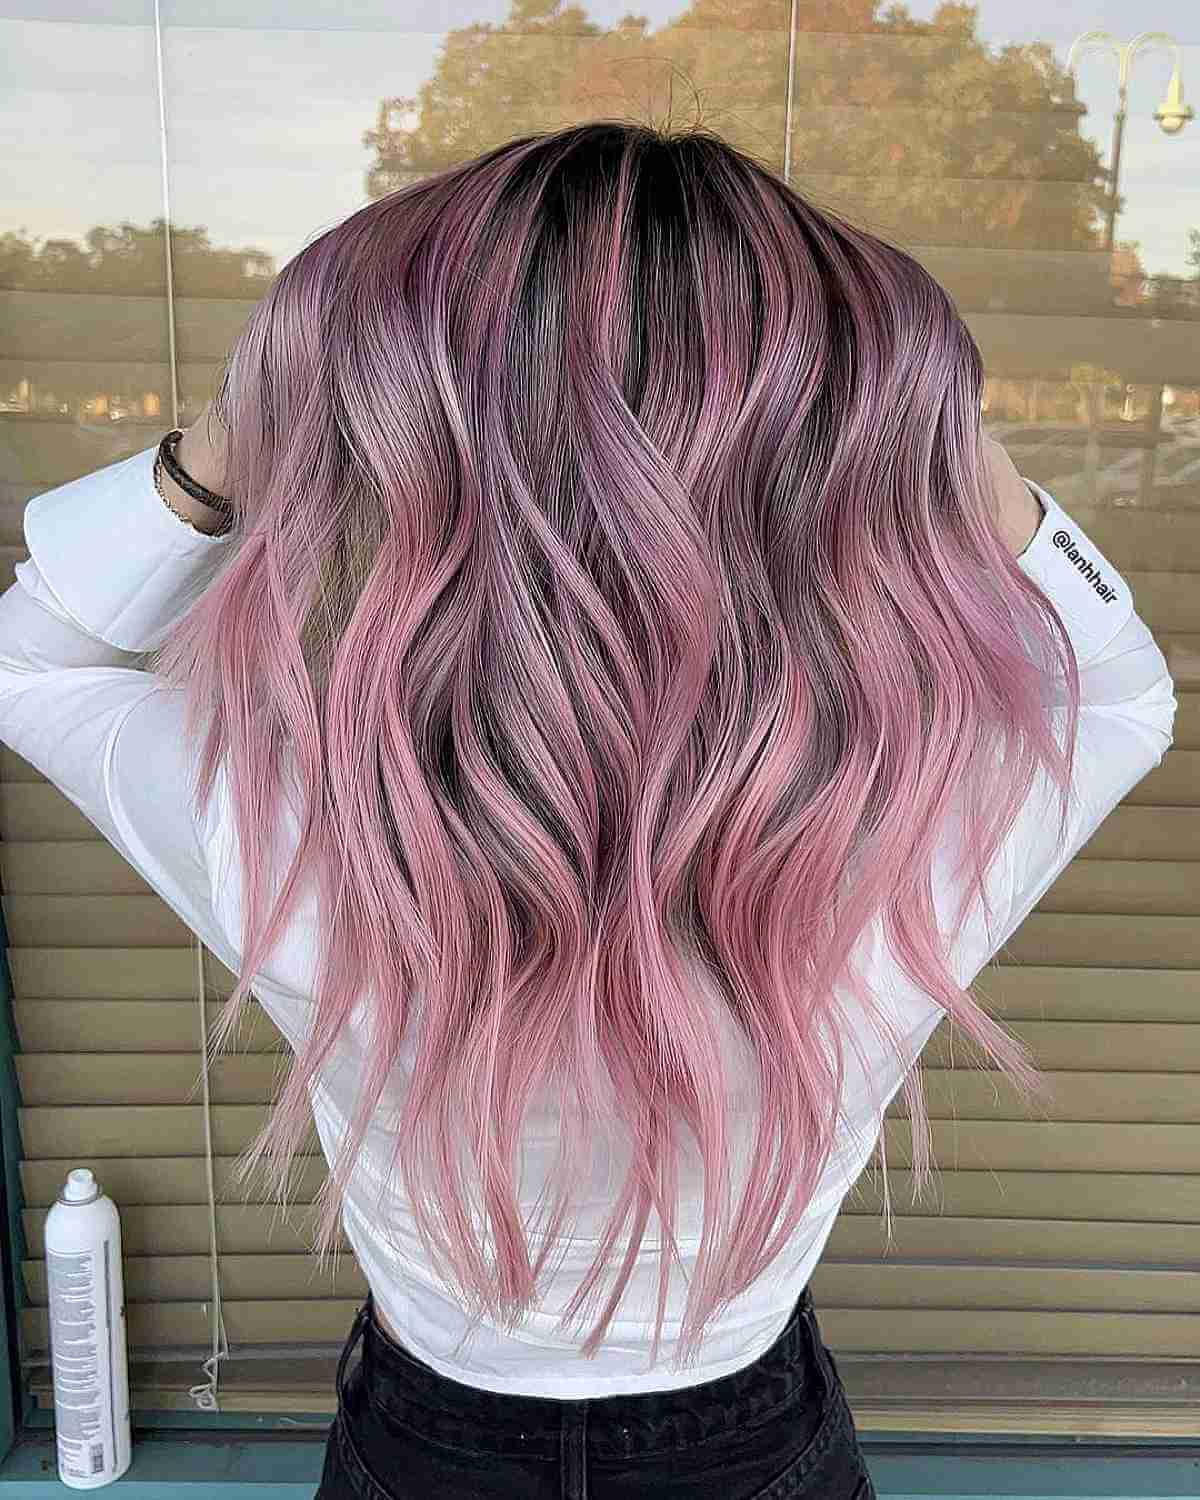 16 Immaculate Pink Balayage Hair Colors To Add Style!